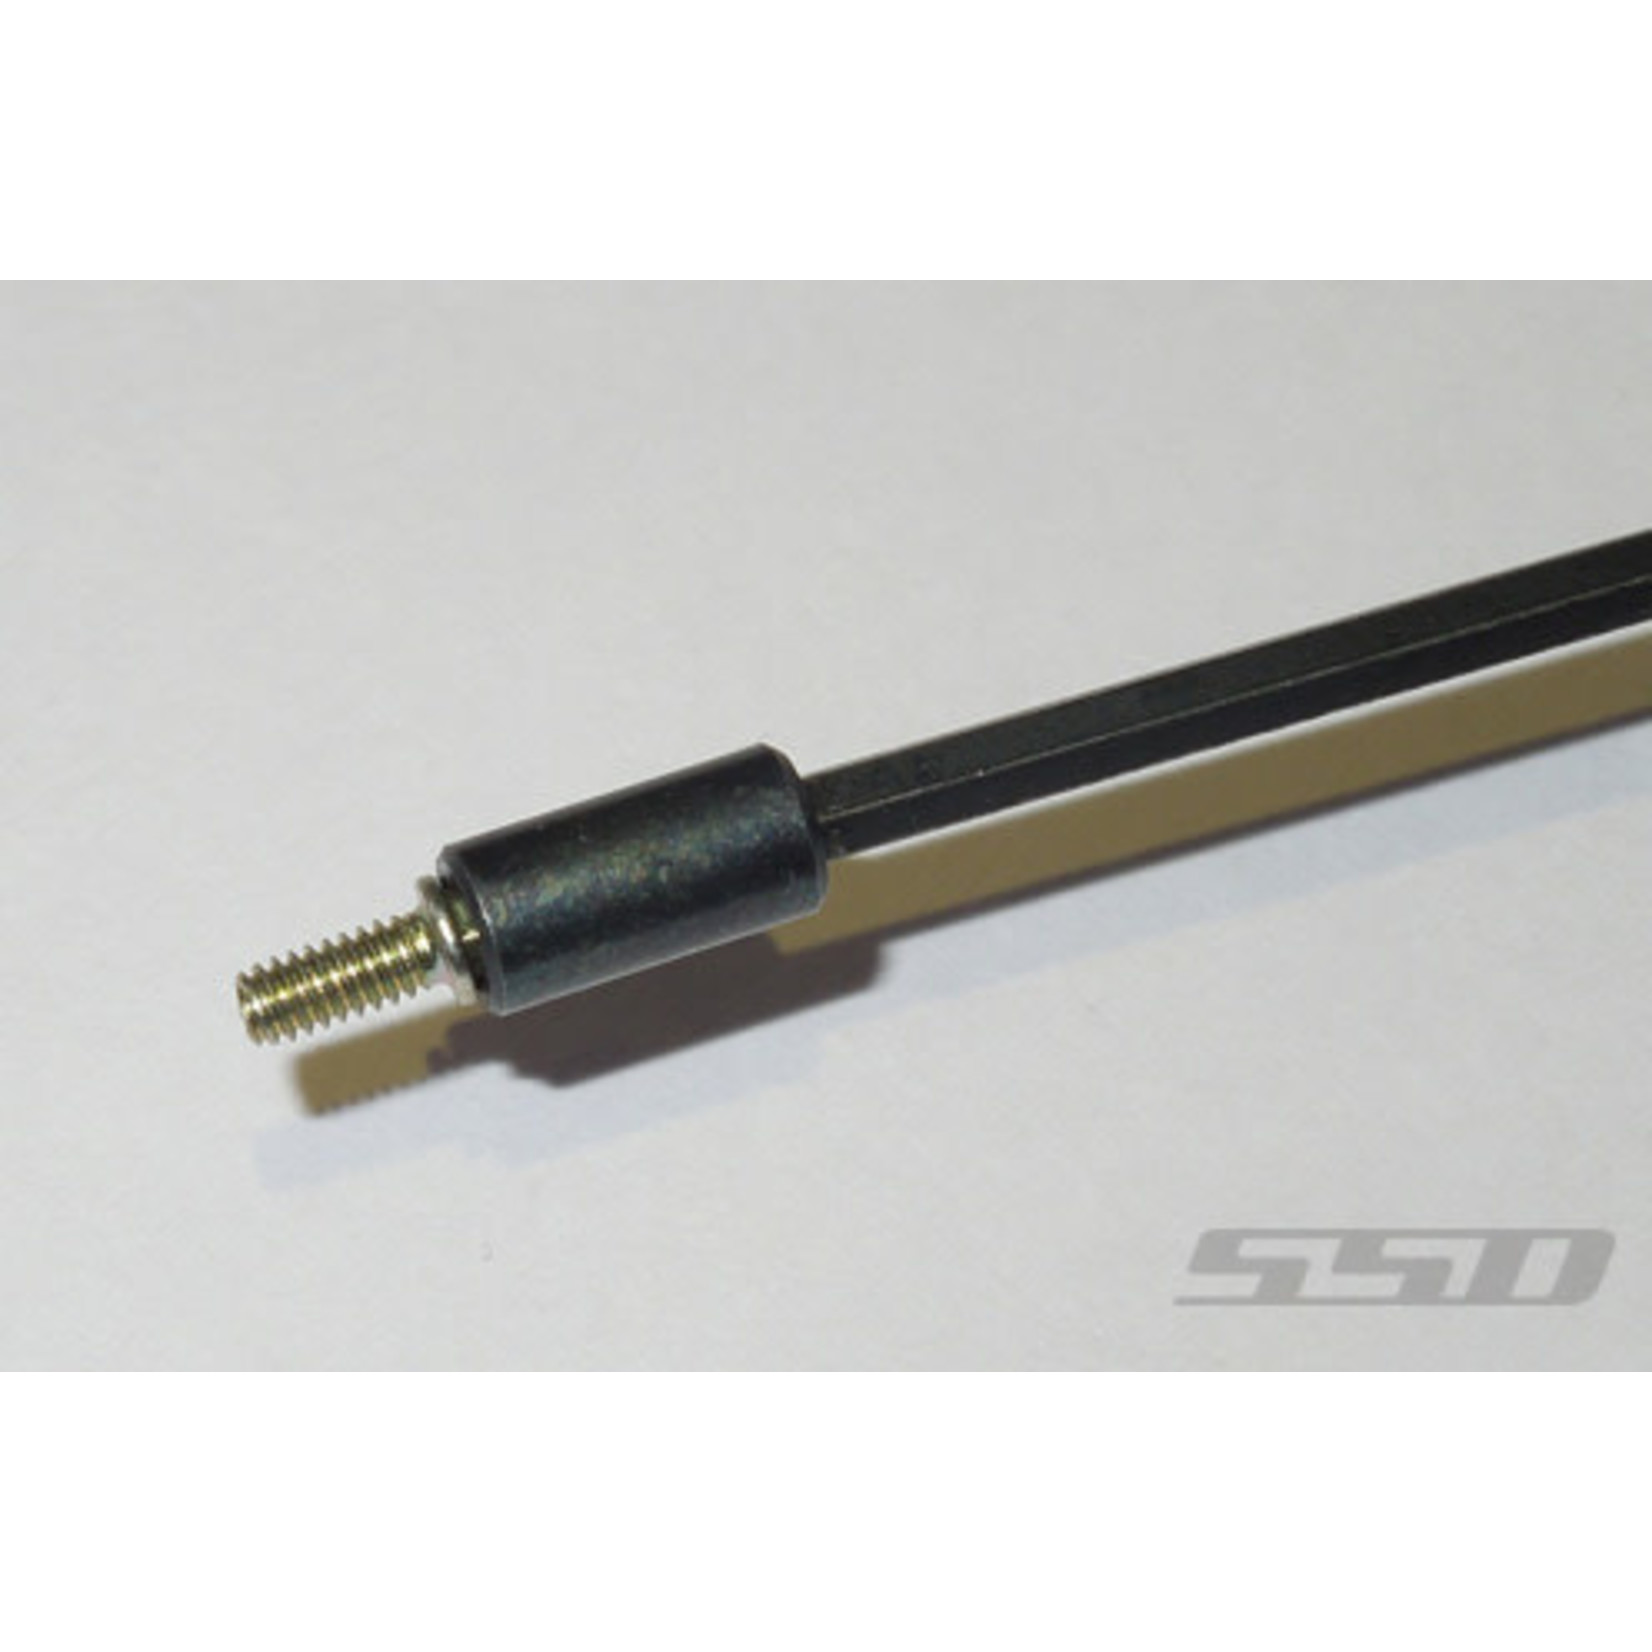 SSD SSD00053 SSD 2mm Hex Socket Tools for M2 Scale Hex